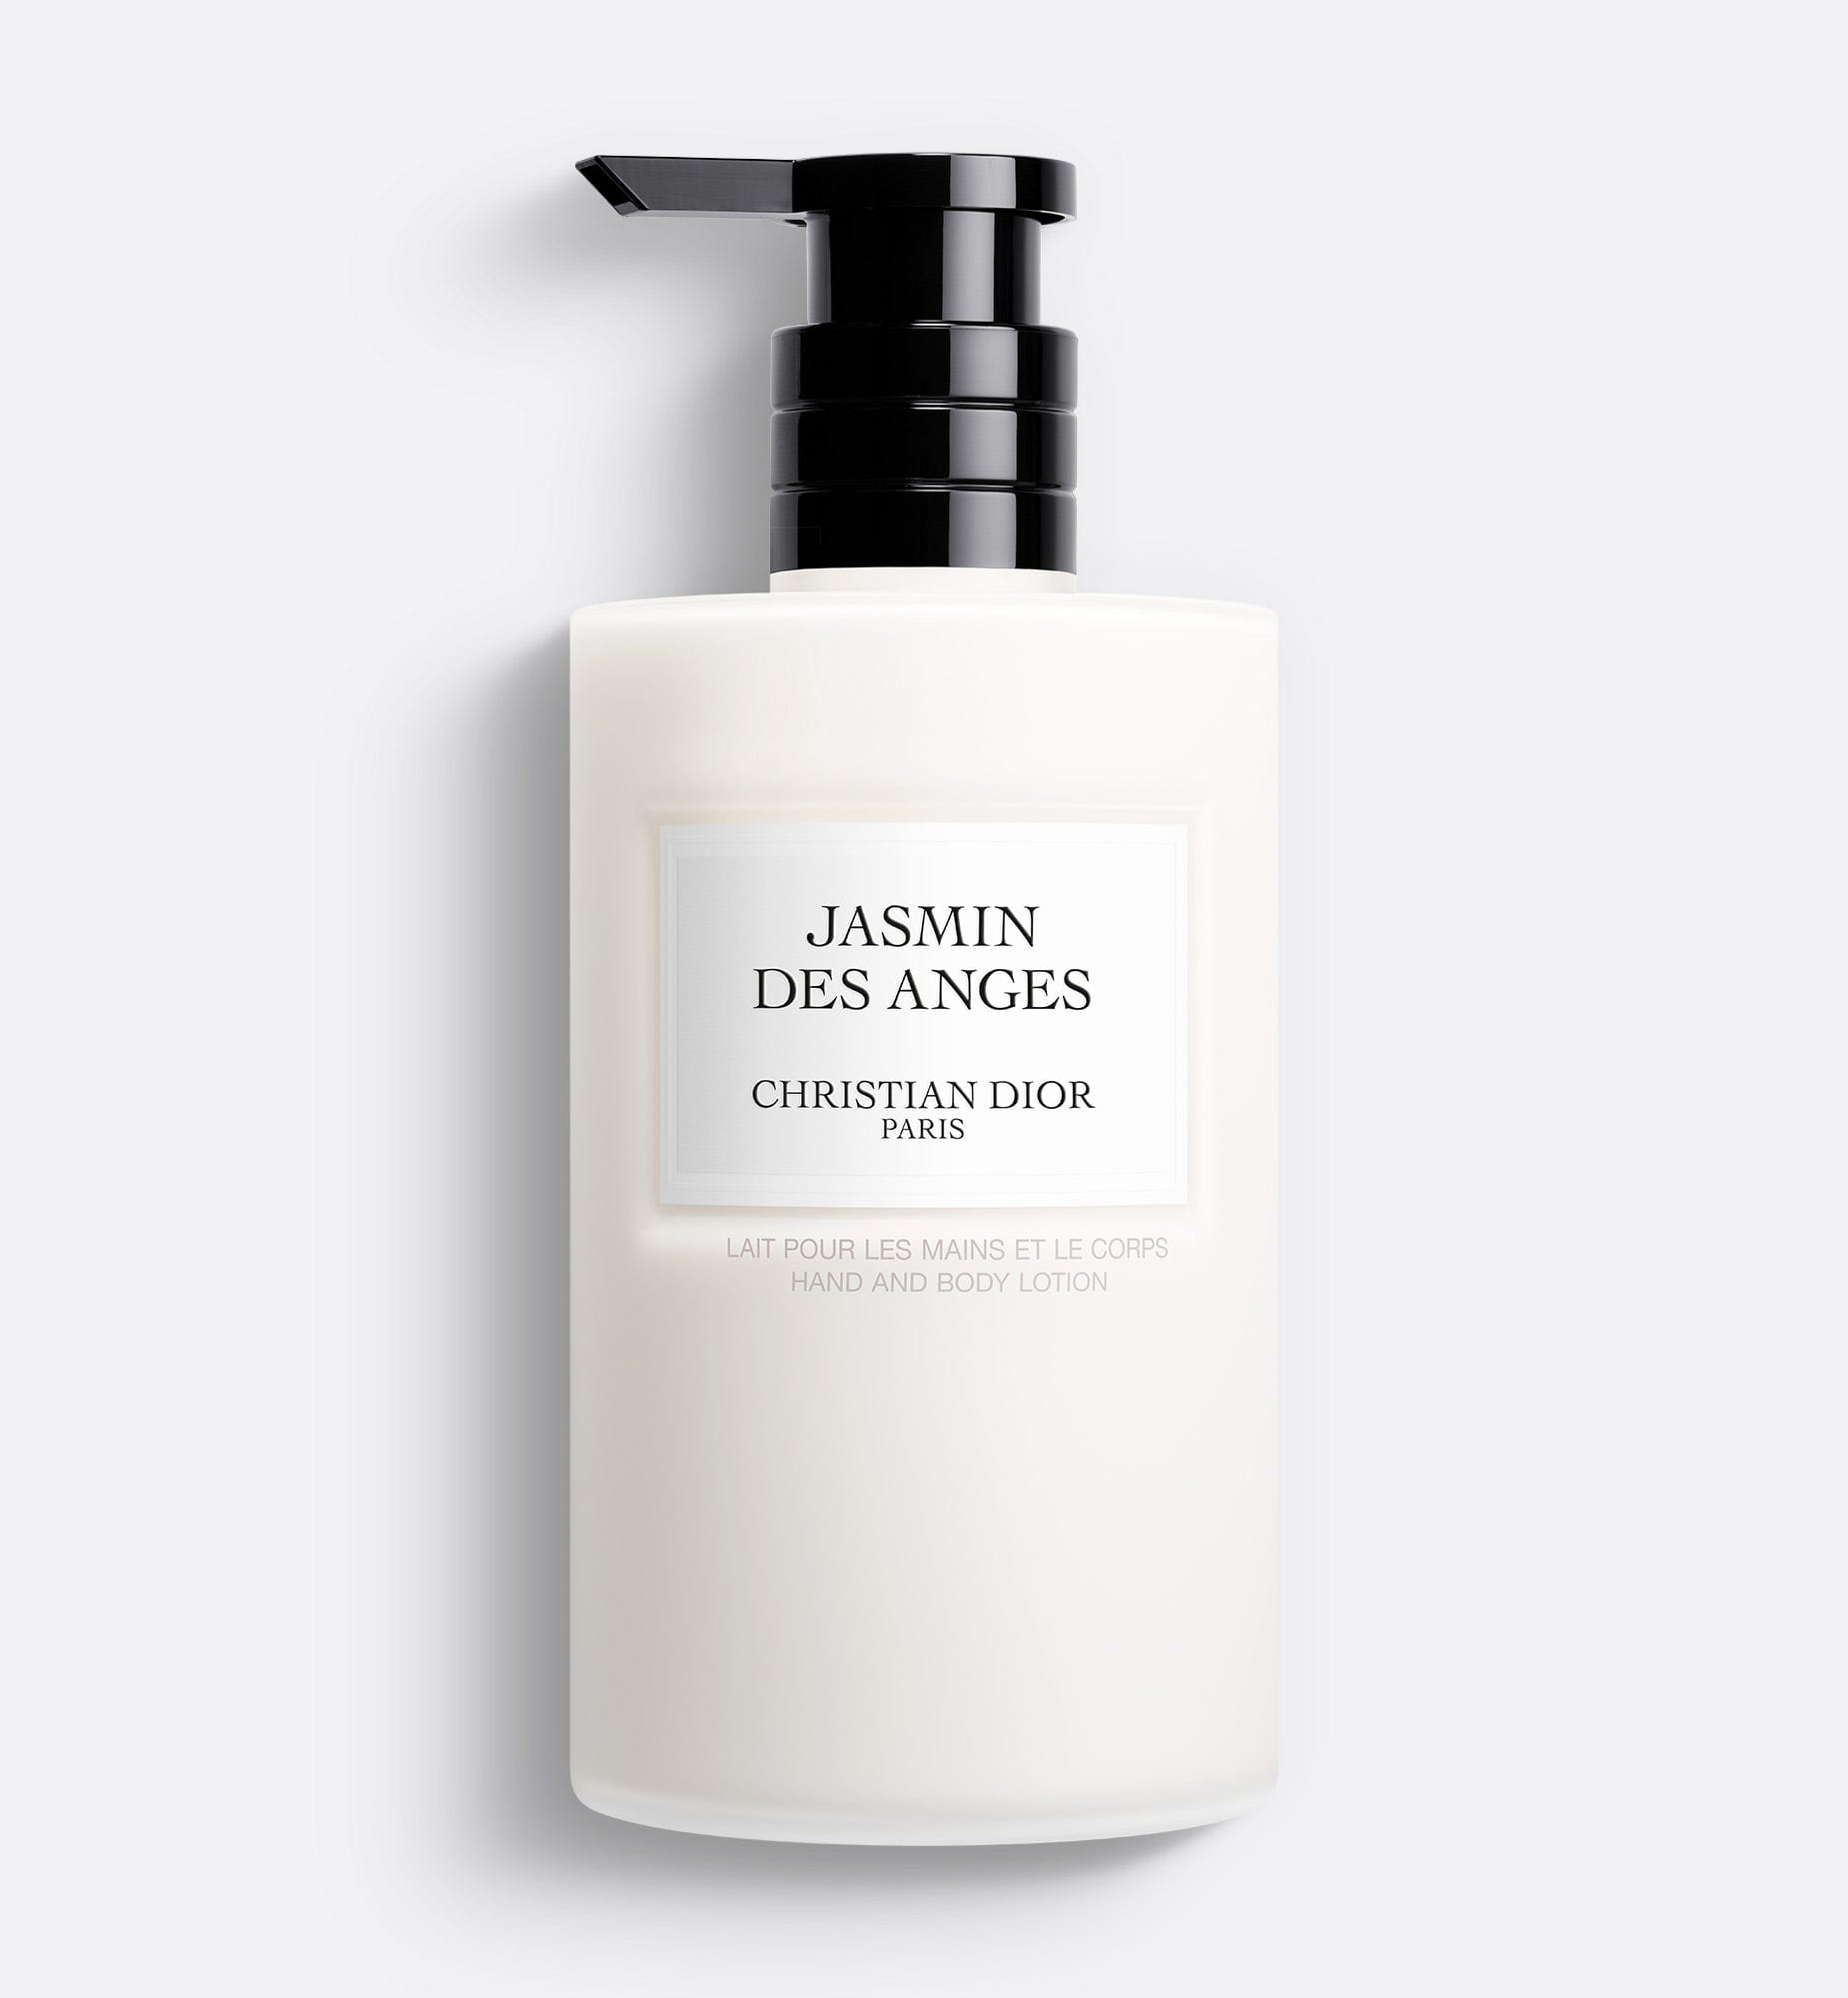 JASMIN DES ANGES HYDRATING BODY LOTION | Hand and Body Lotion